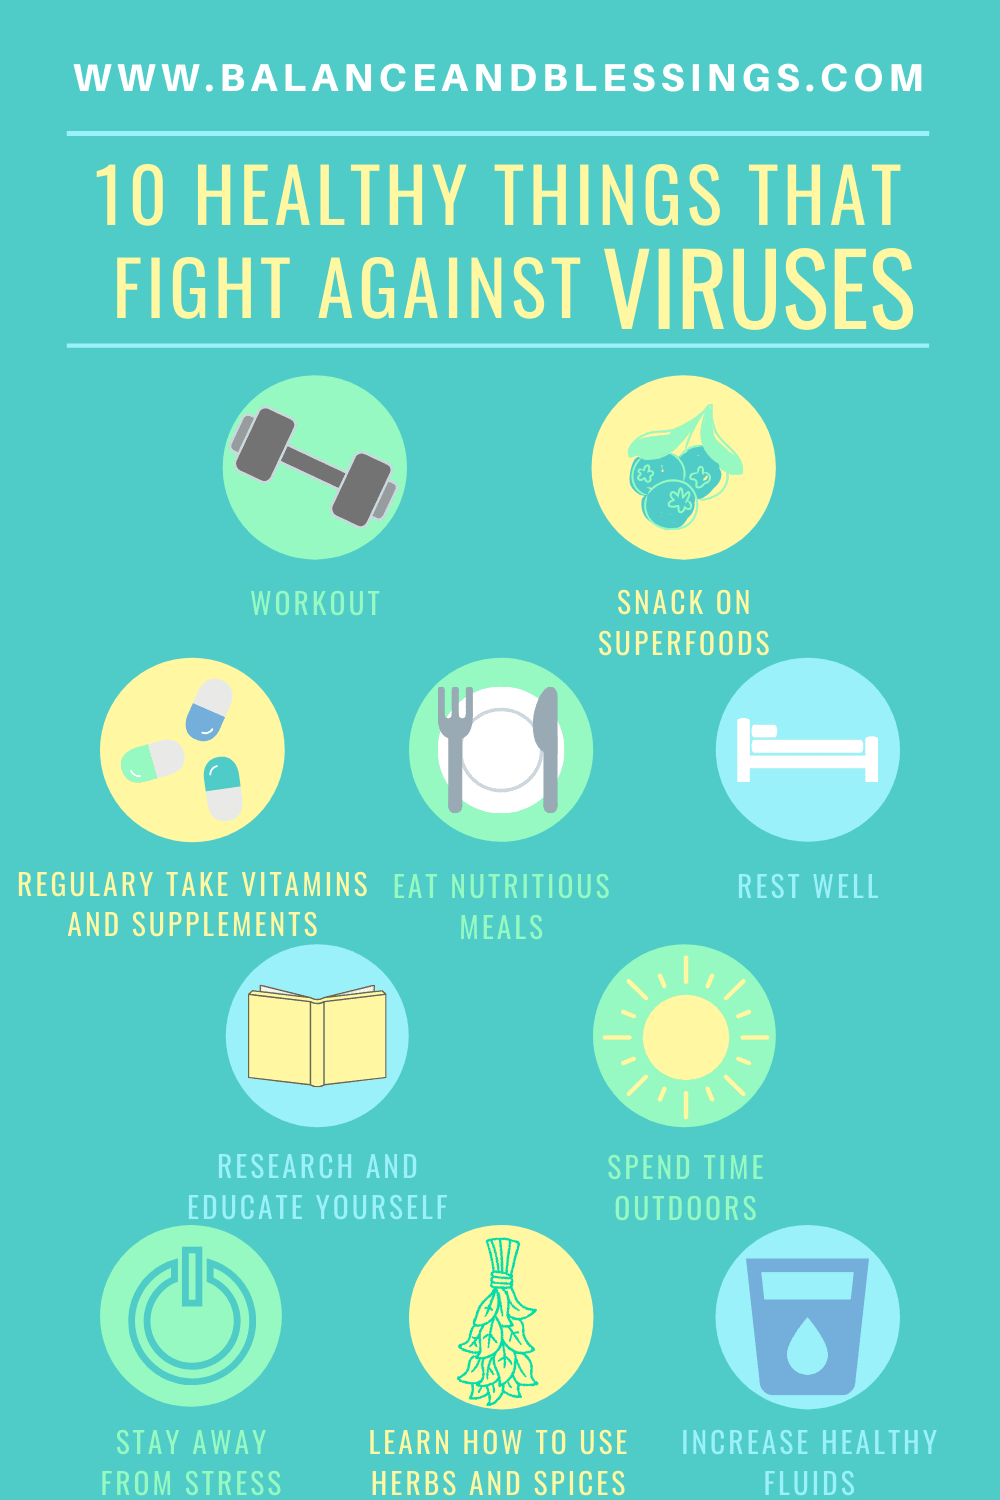 10 Healthy things that fight against viruses - Balance & Blessings